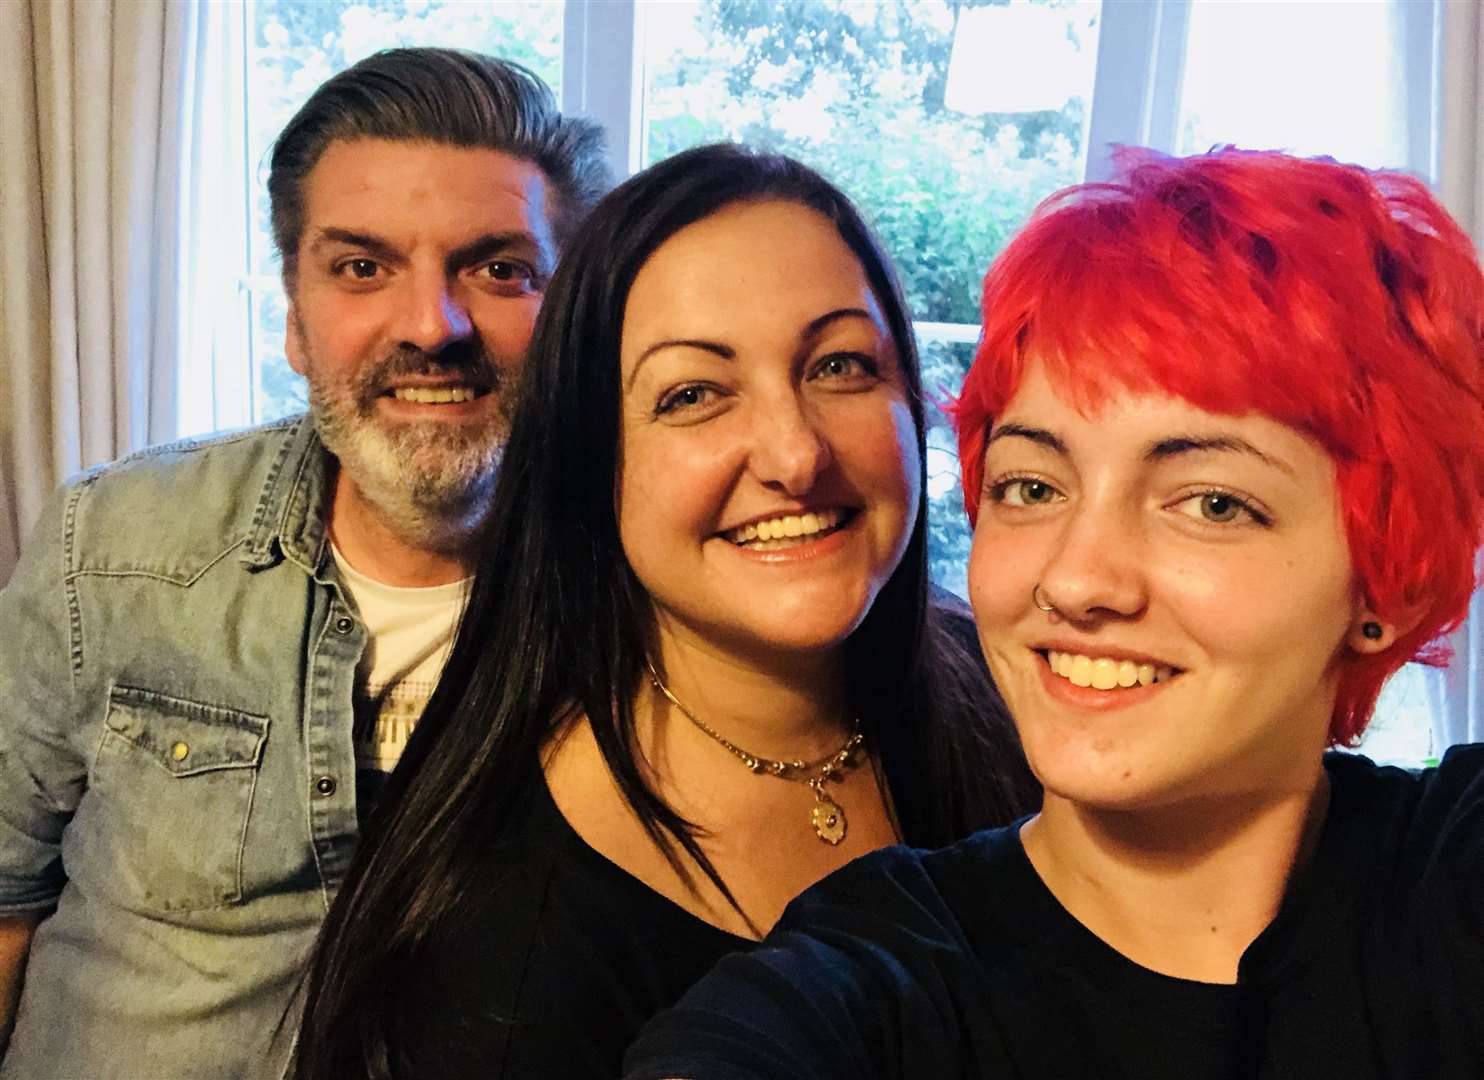 The teenager was all smiles with her mother and father one year after the ordeal